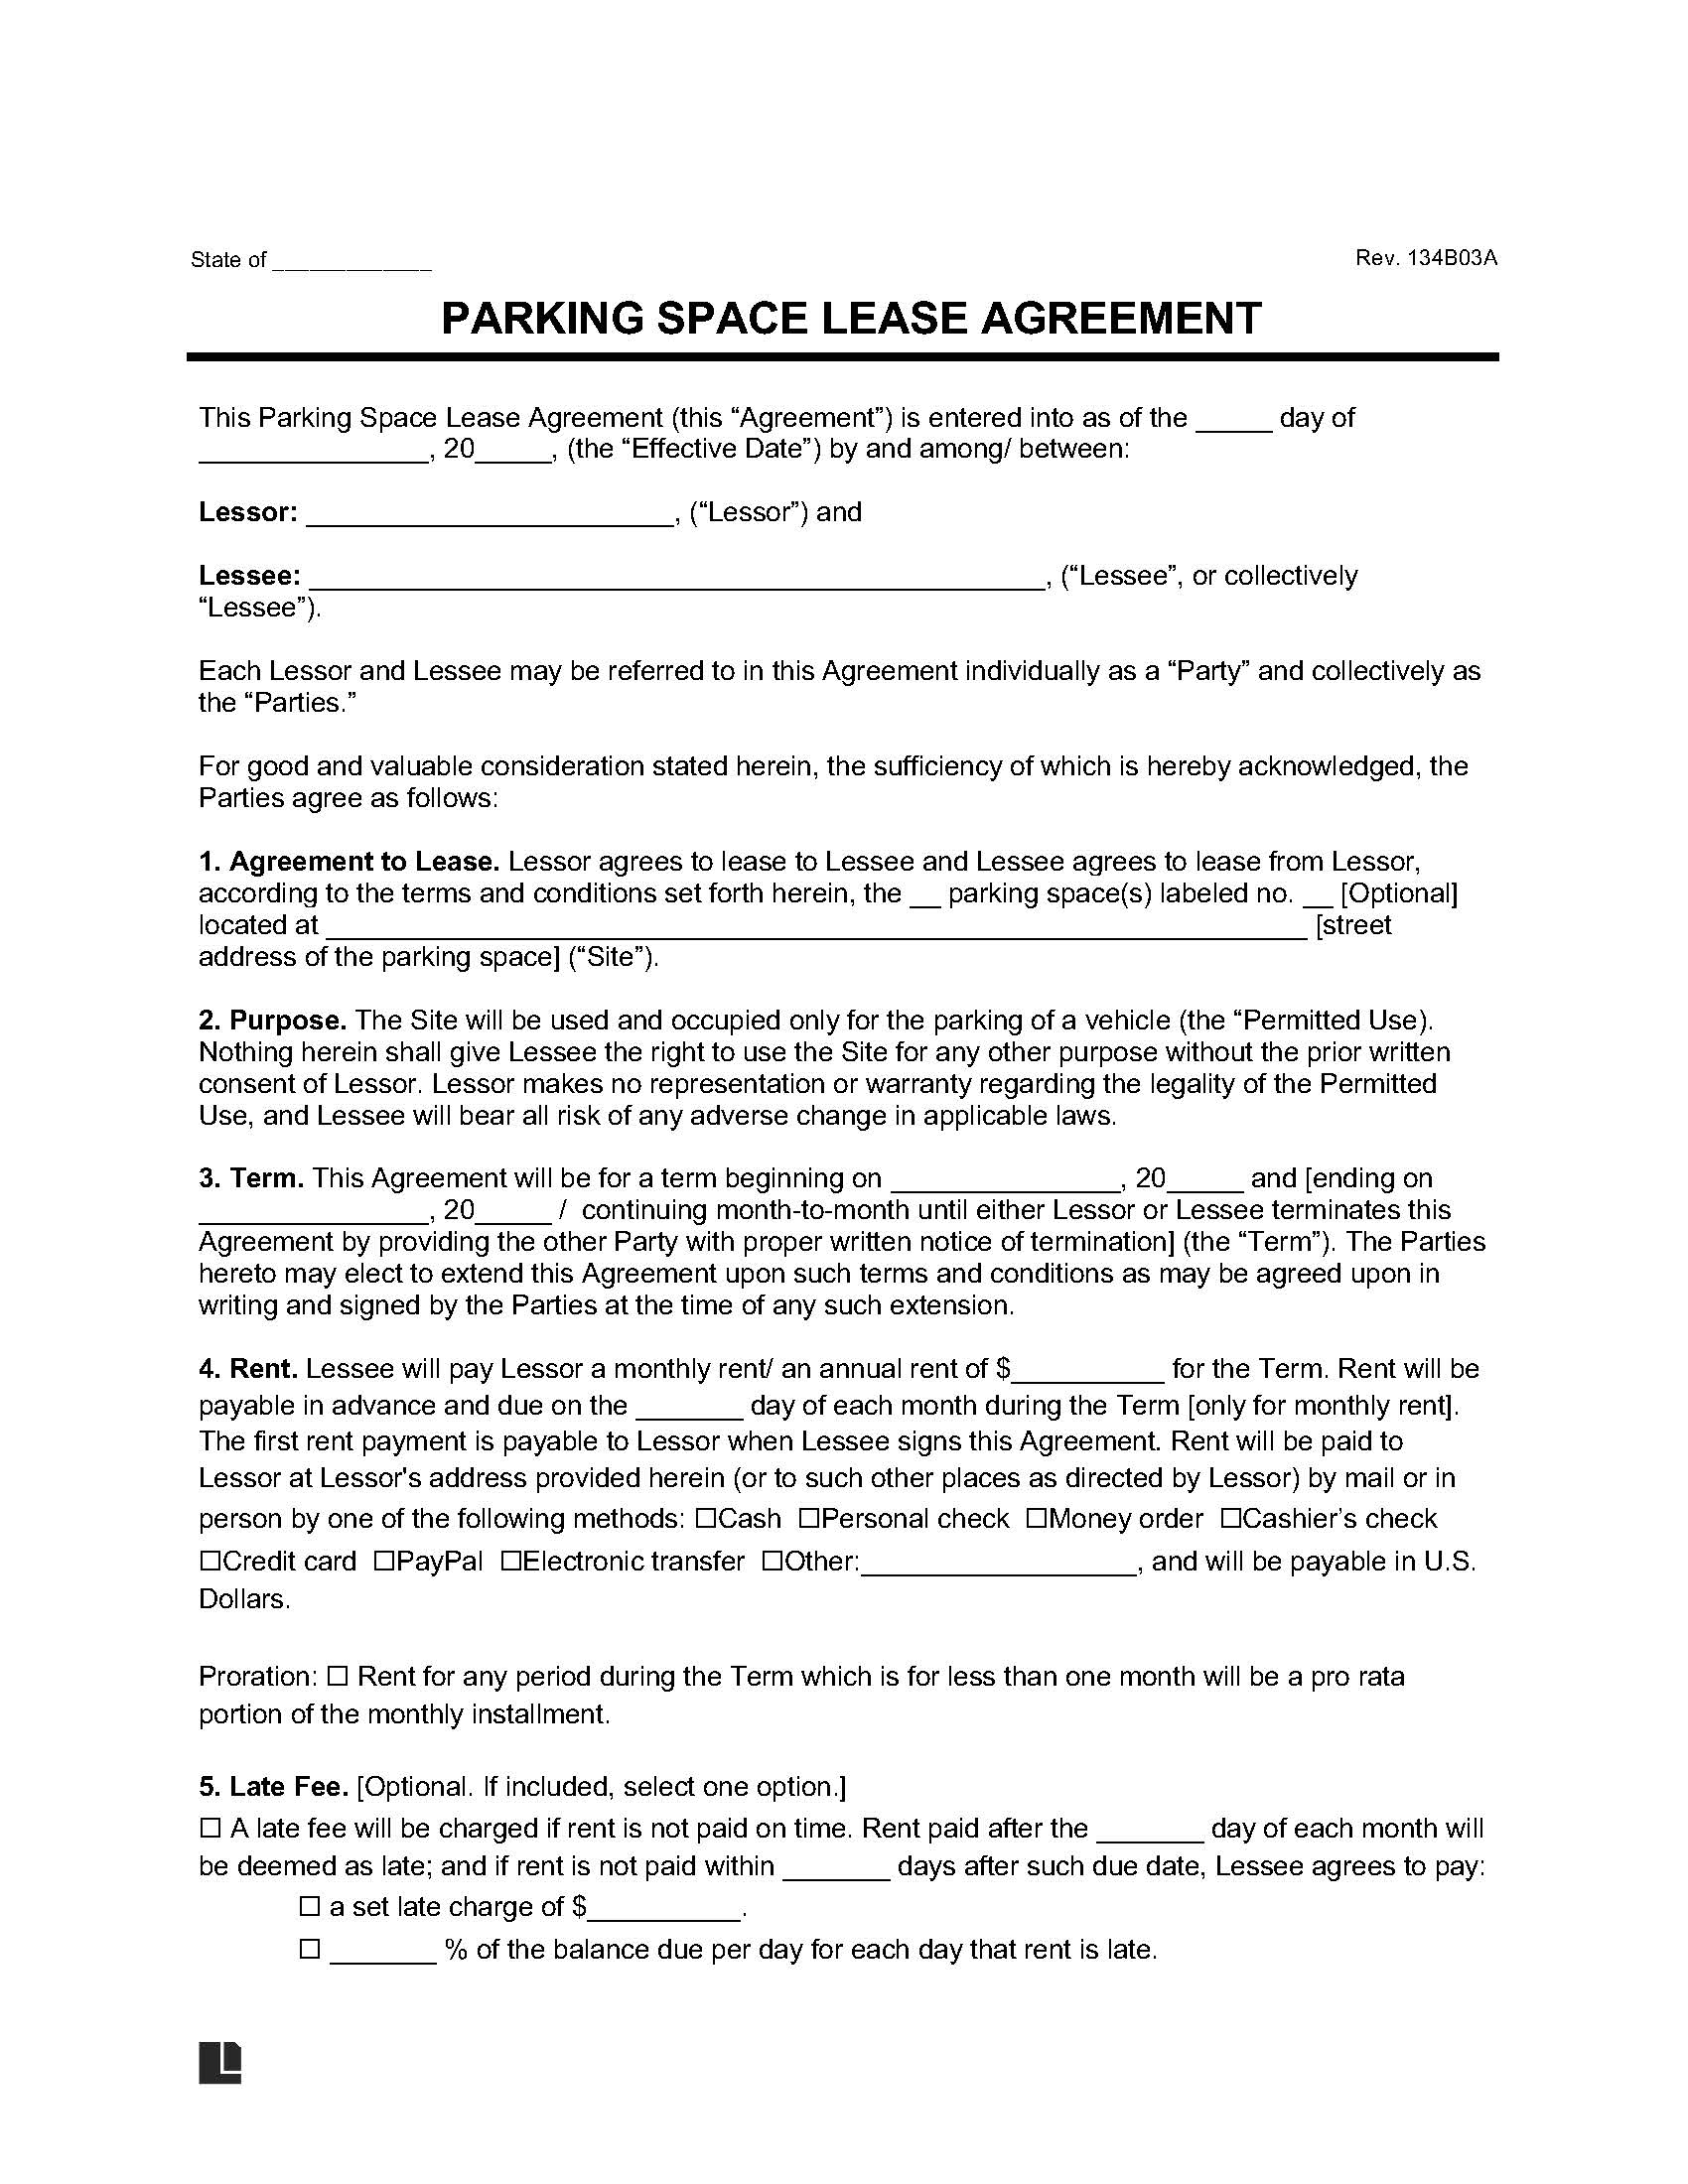 parking space lease agreement